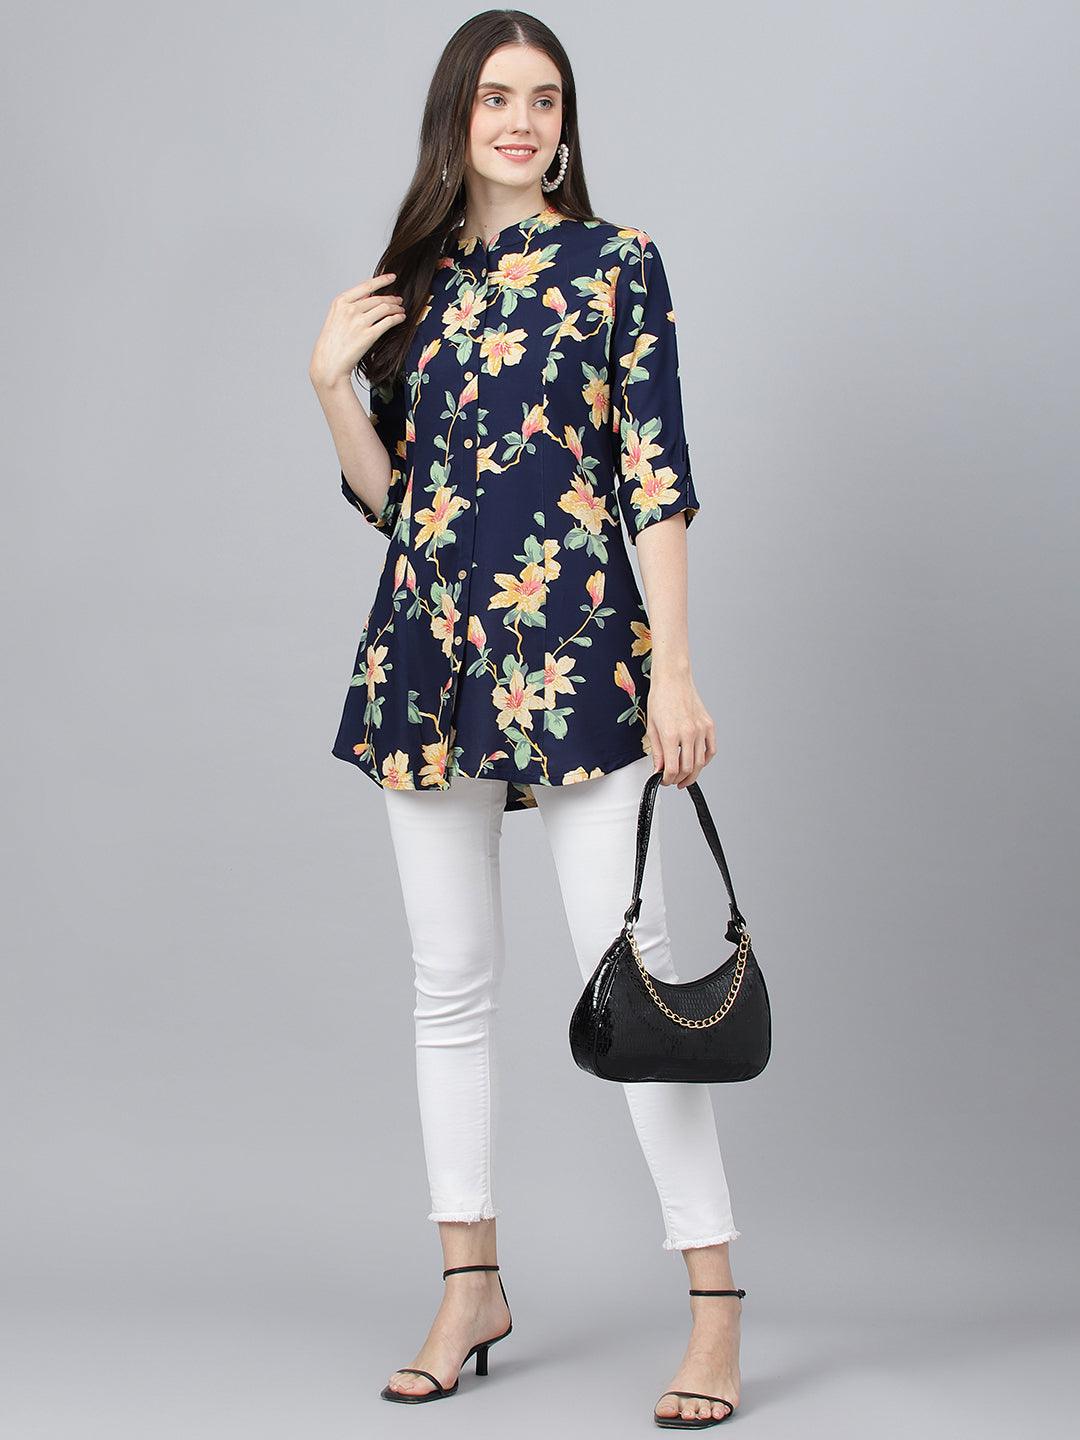 Divena Navy Blue Floral printed Rayon A-line Shirts Style Top - divena world